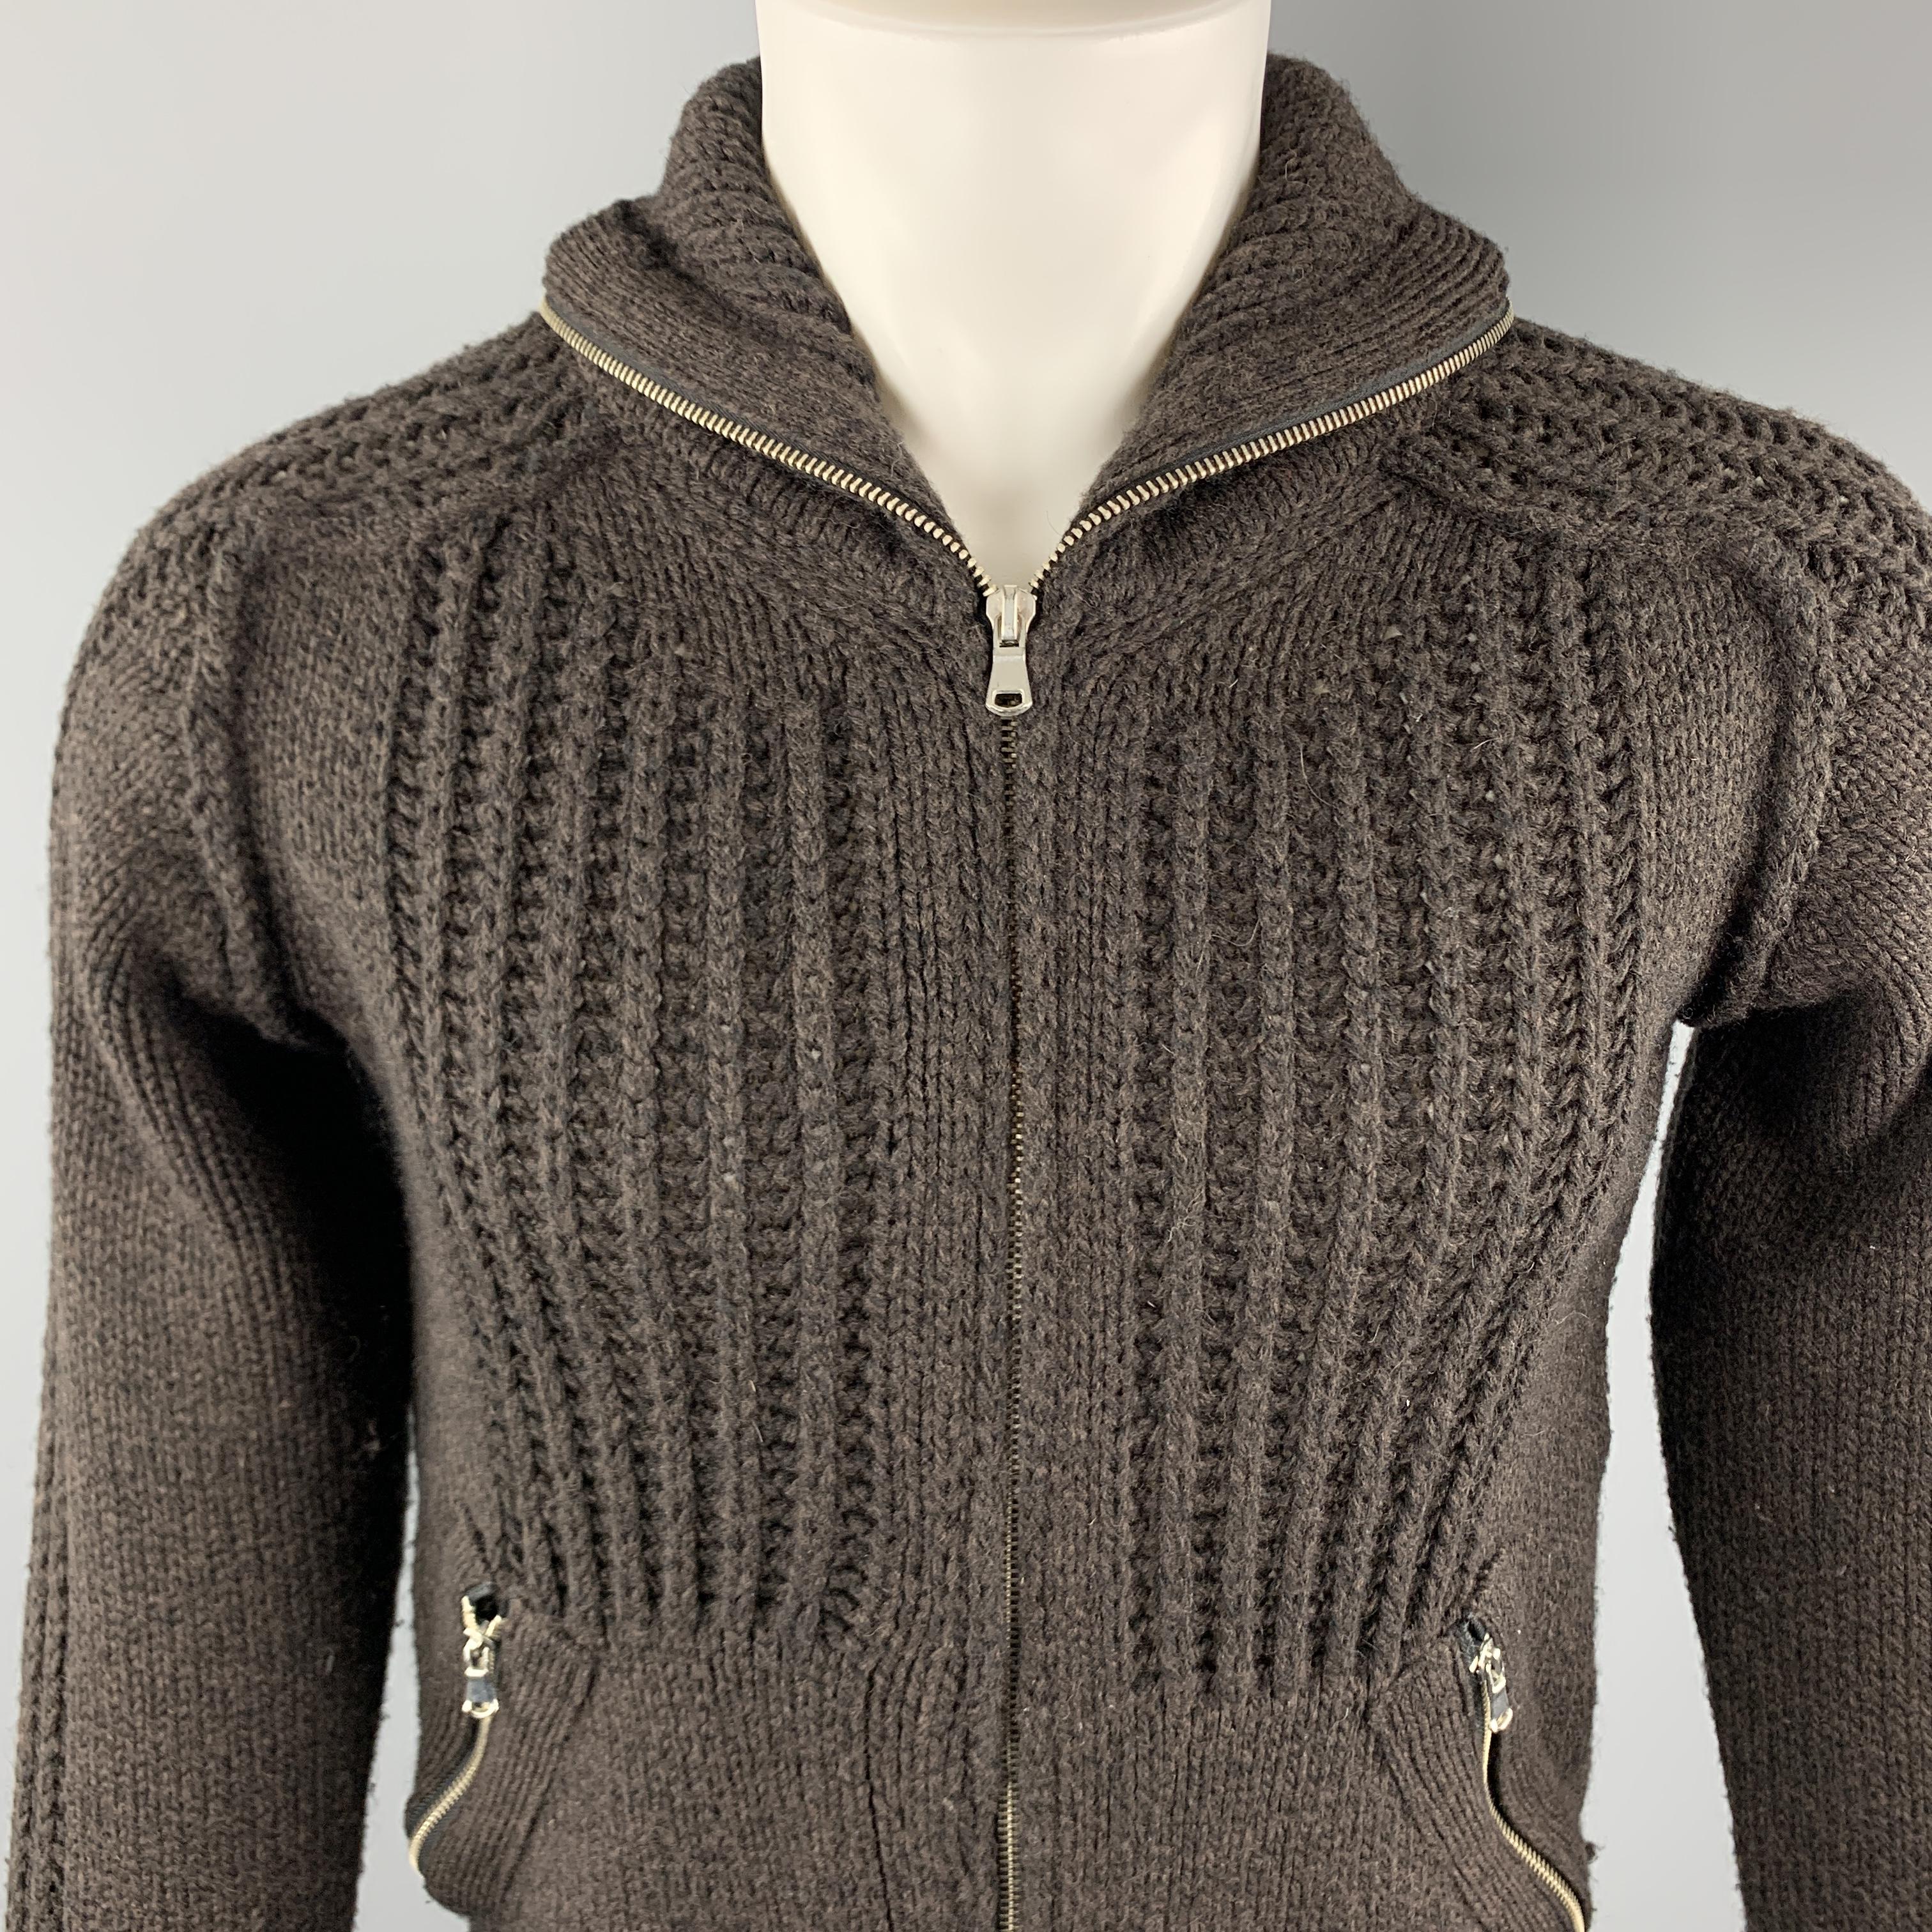 IMPERIAL Jacket comes in a brown knitted wool blend material, featuring a high collar, texture at front and sleeves, zip pockets, ribbed cuffs and hem, zip up. Made in Italy. 

Excellent Pre-Owned Condition.
Marked: M

Measurements:

Shoulder: 17